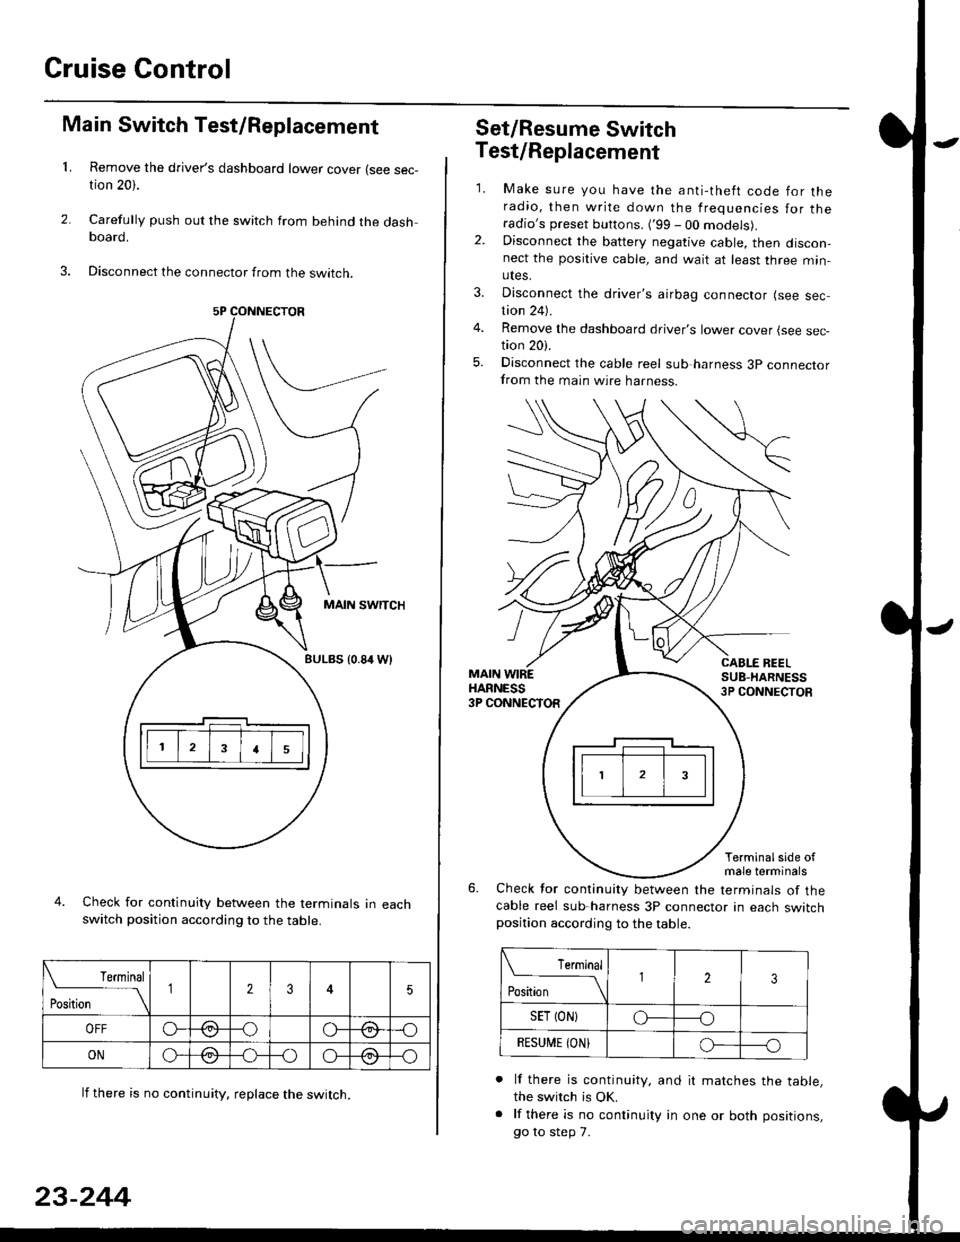 HONDA CIVIC 1996 6.G Owners Guide Cruise Gontrol
3.
1.
2.
Main Switch Test/Replacement
Remove the drivers dashboard lower cover (see sec-tion 20).
Carefully push out the switch from behind the dashboard.
Disconnect the connector from